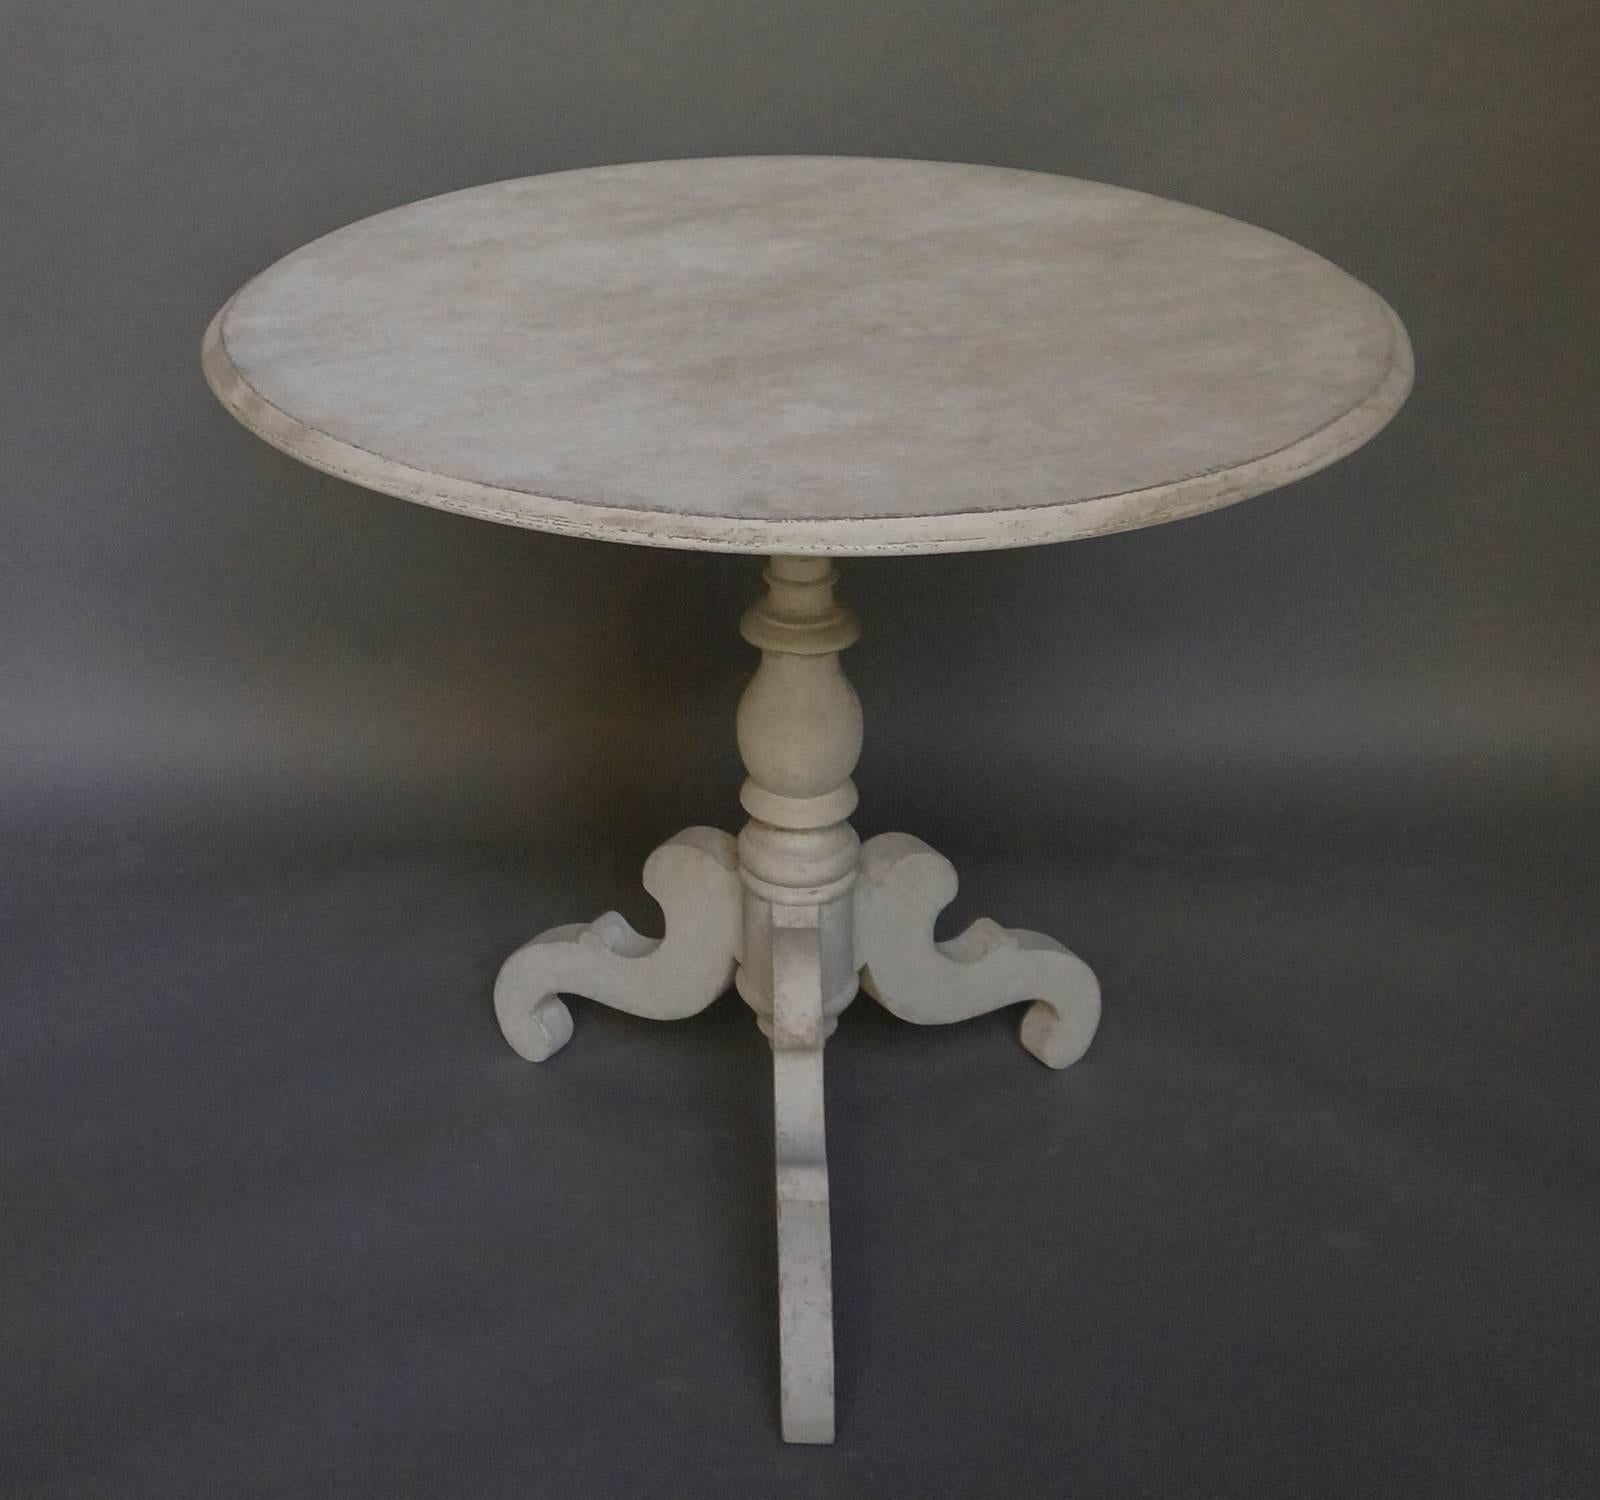 Tilt-top table to seat four, Sweden, circa 1850. Turned base with three shaped legs. Classic Swedish design.